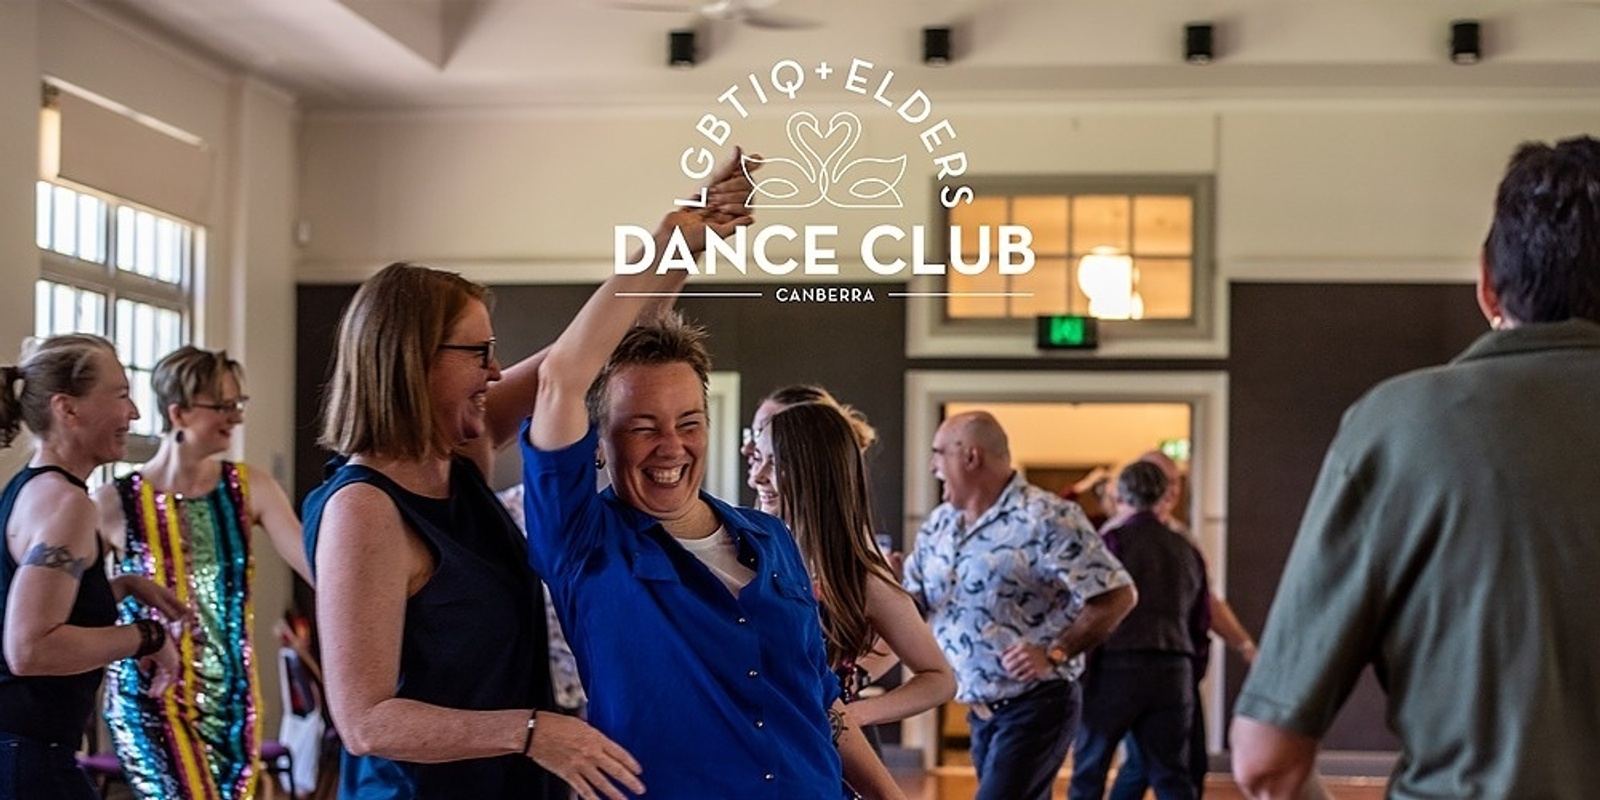 Banner image for The LGBTIQ+ Elders Dance Club Canberra: June Winter Edition